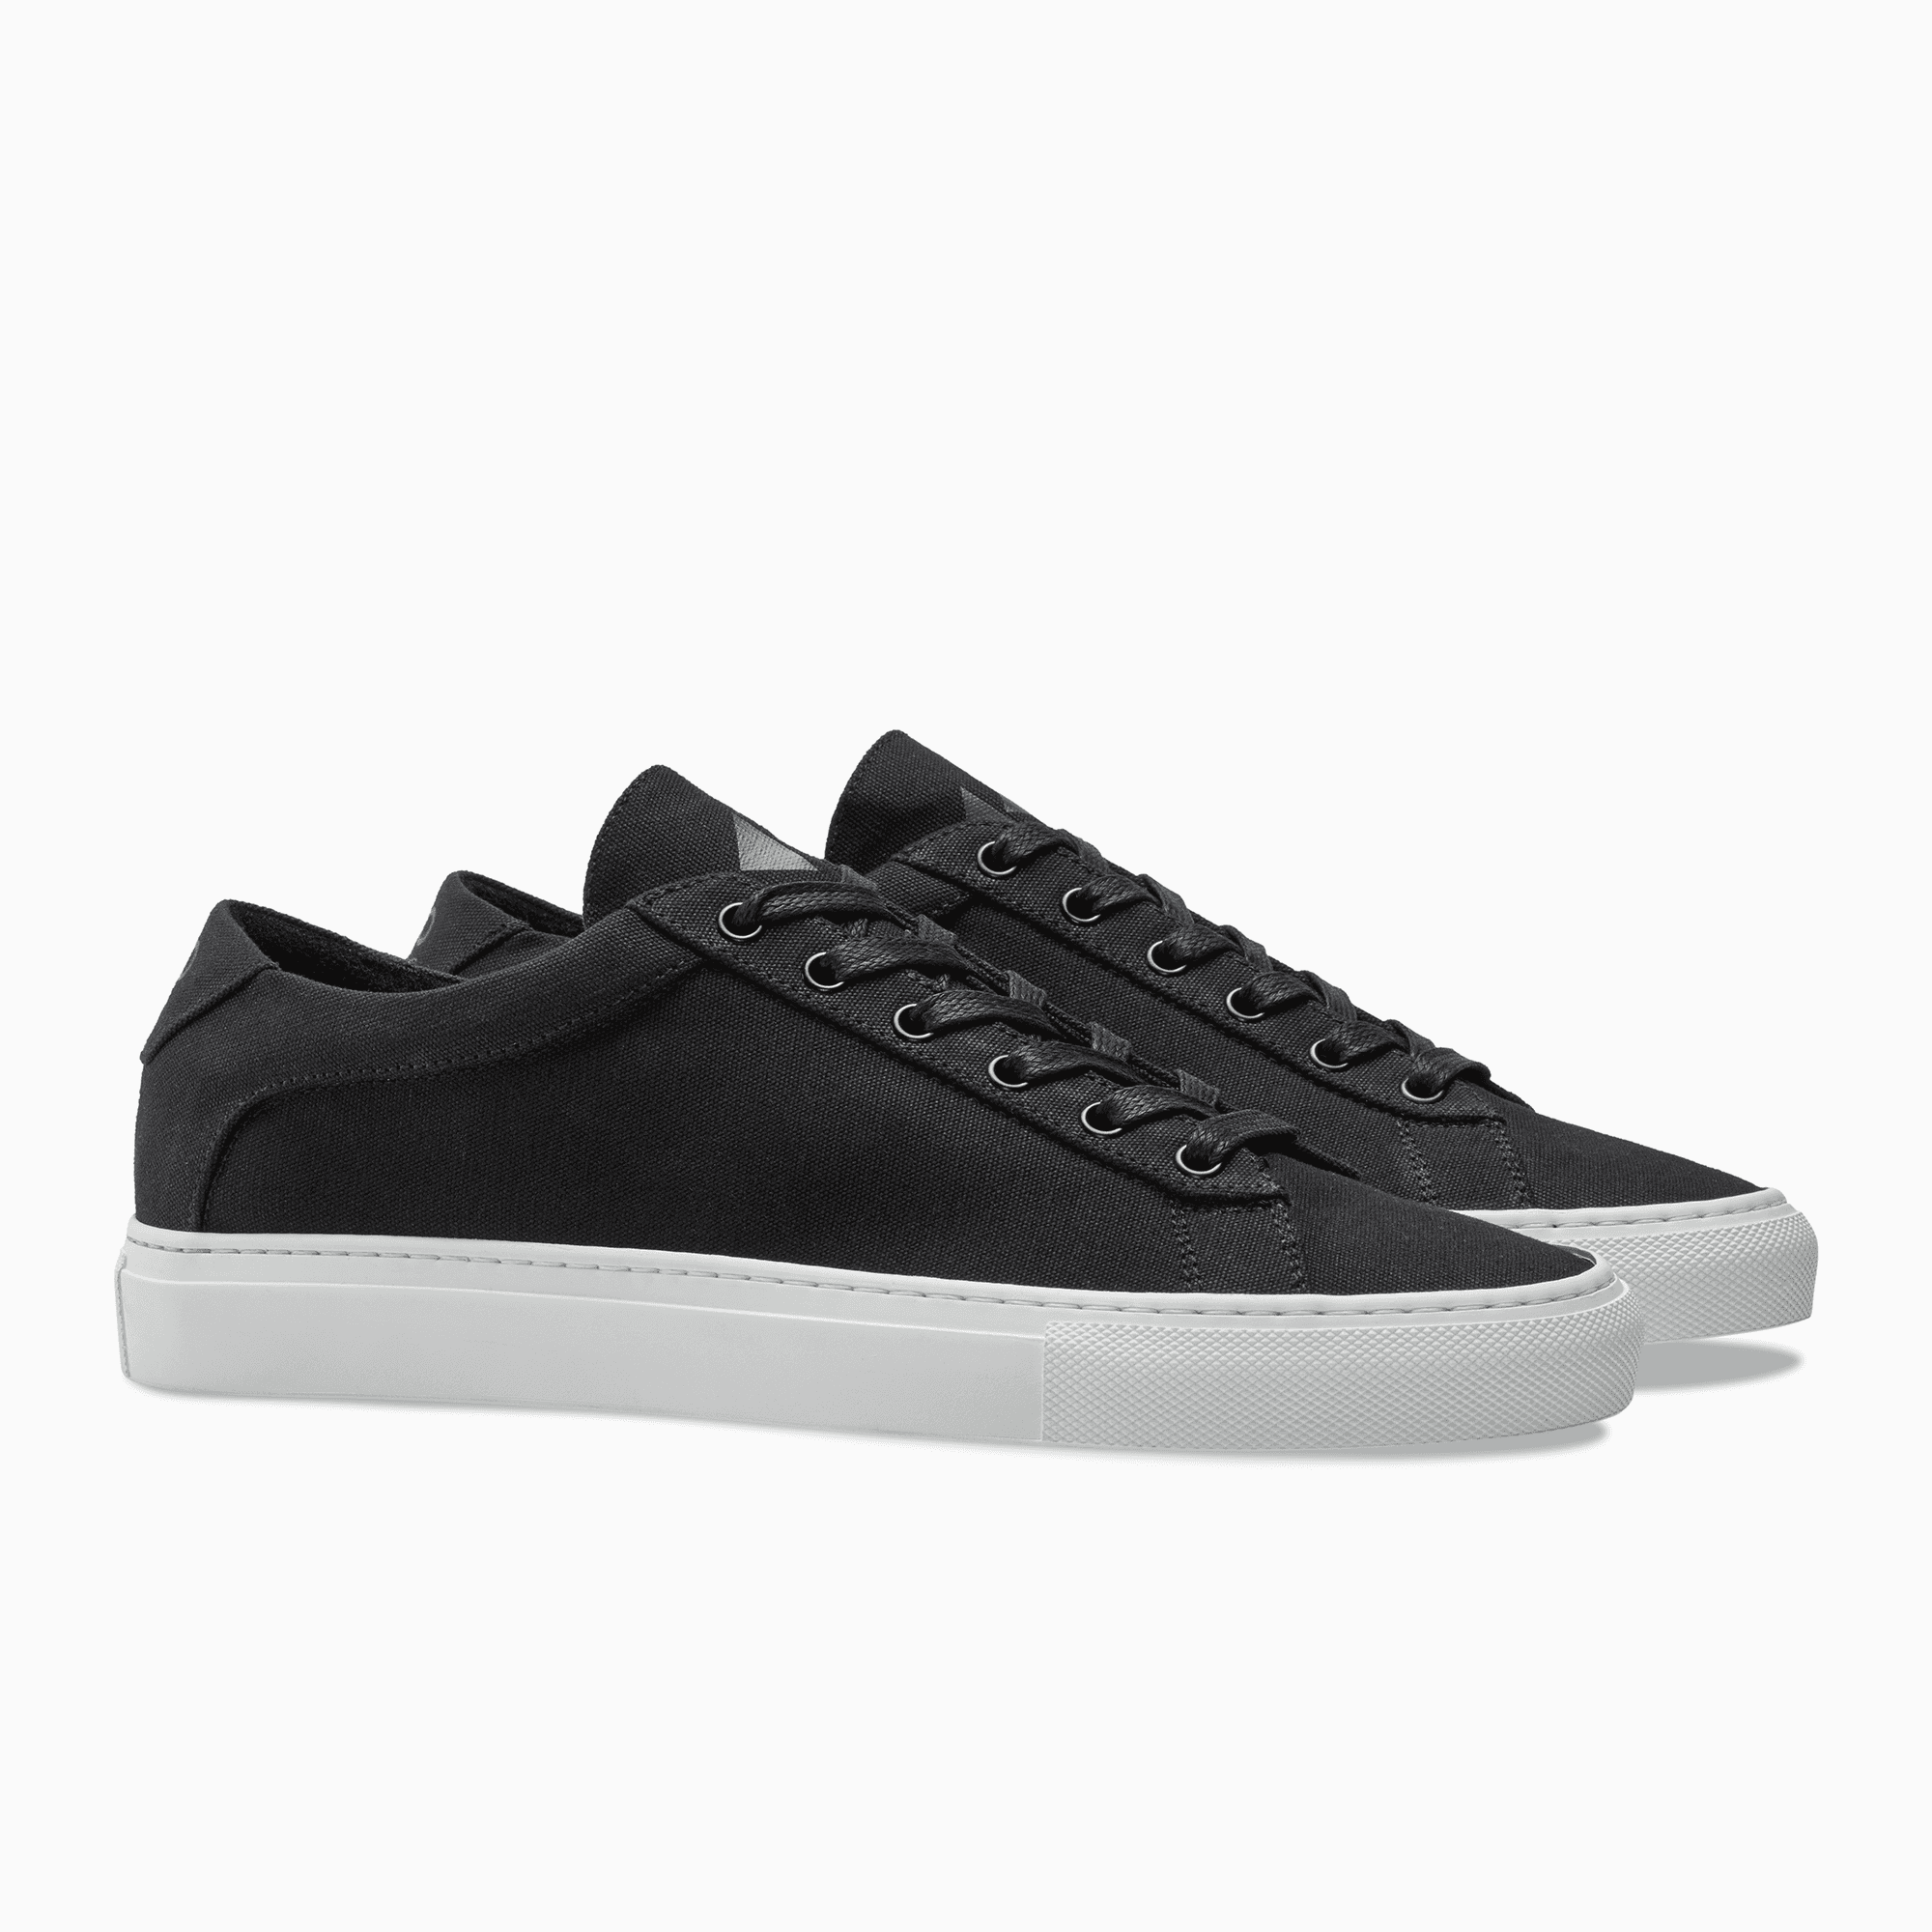 Black Canvas Low Top Sneaker white sole  Mens Koio